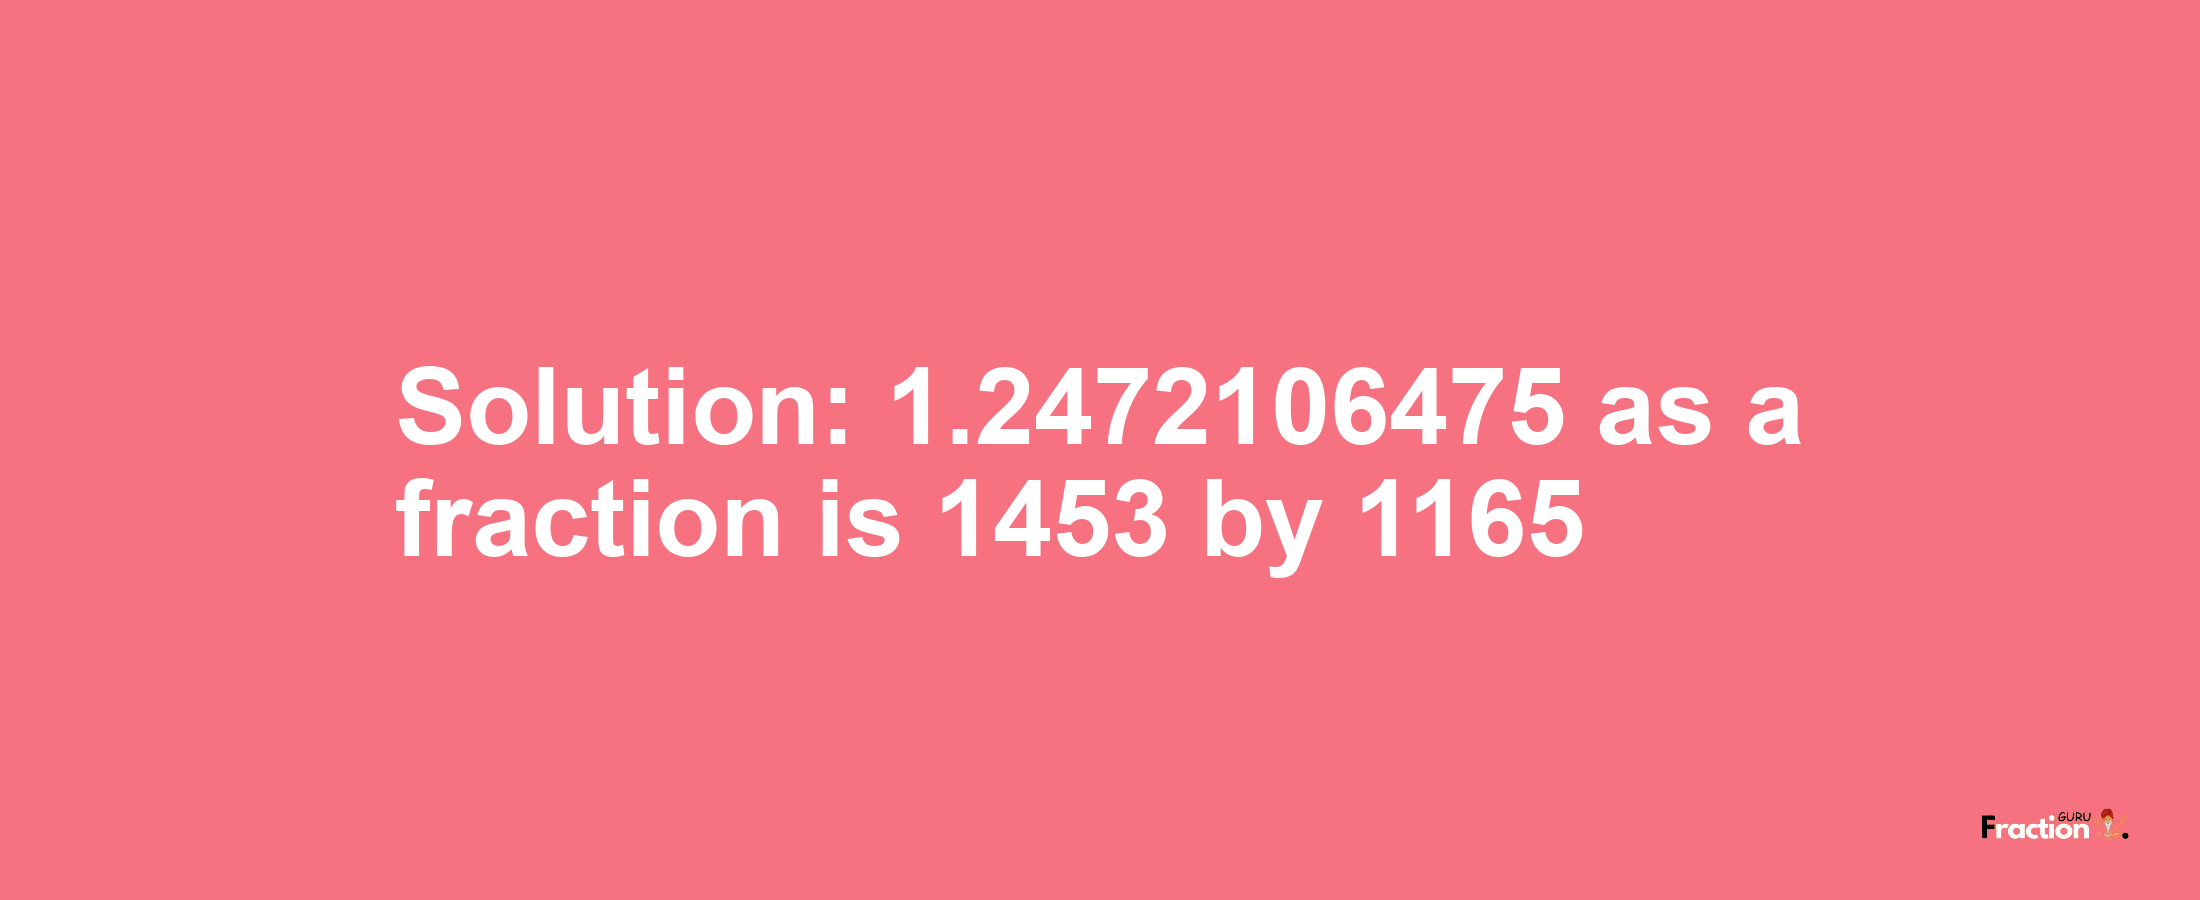 Solution:1.2472106475 as a fraction is 1453/1165